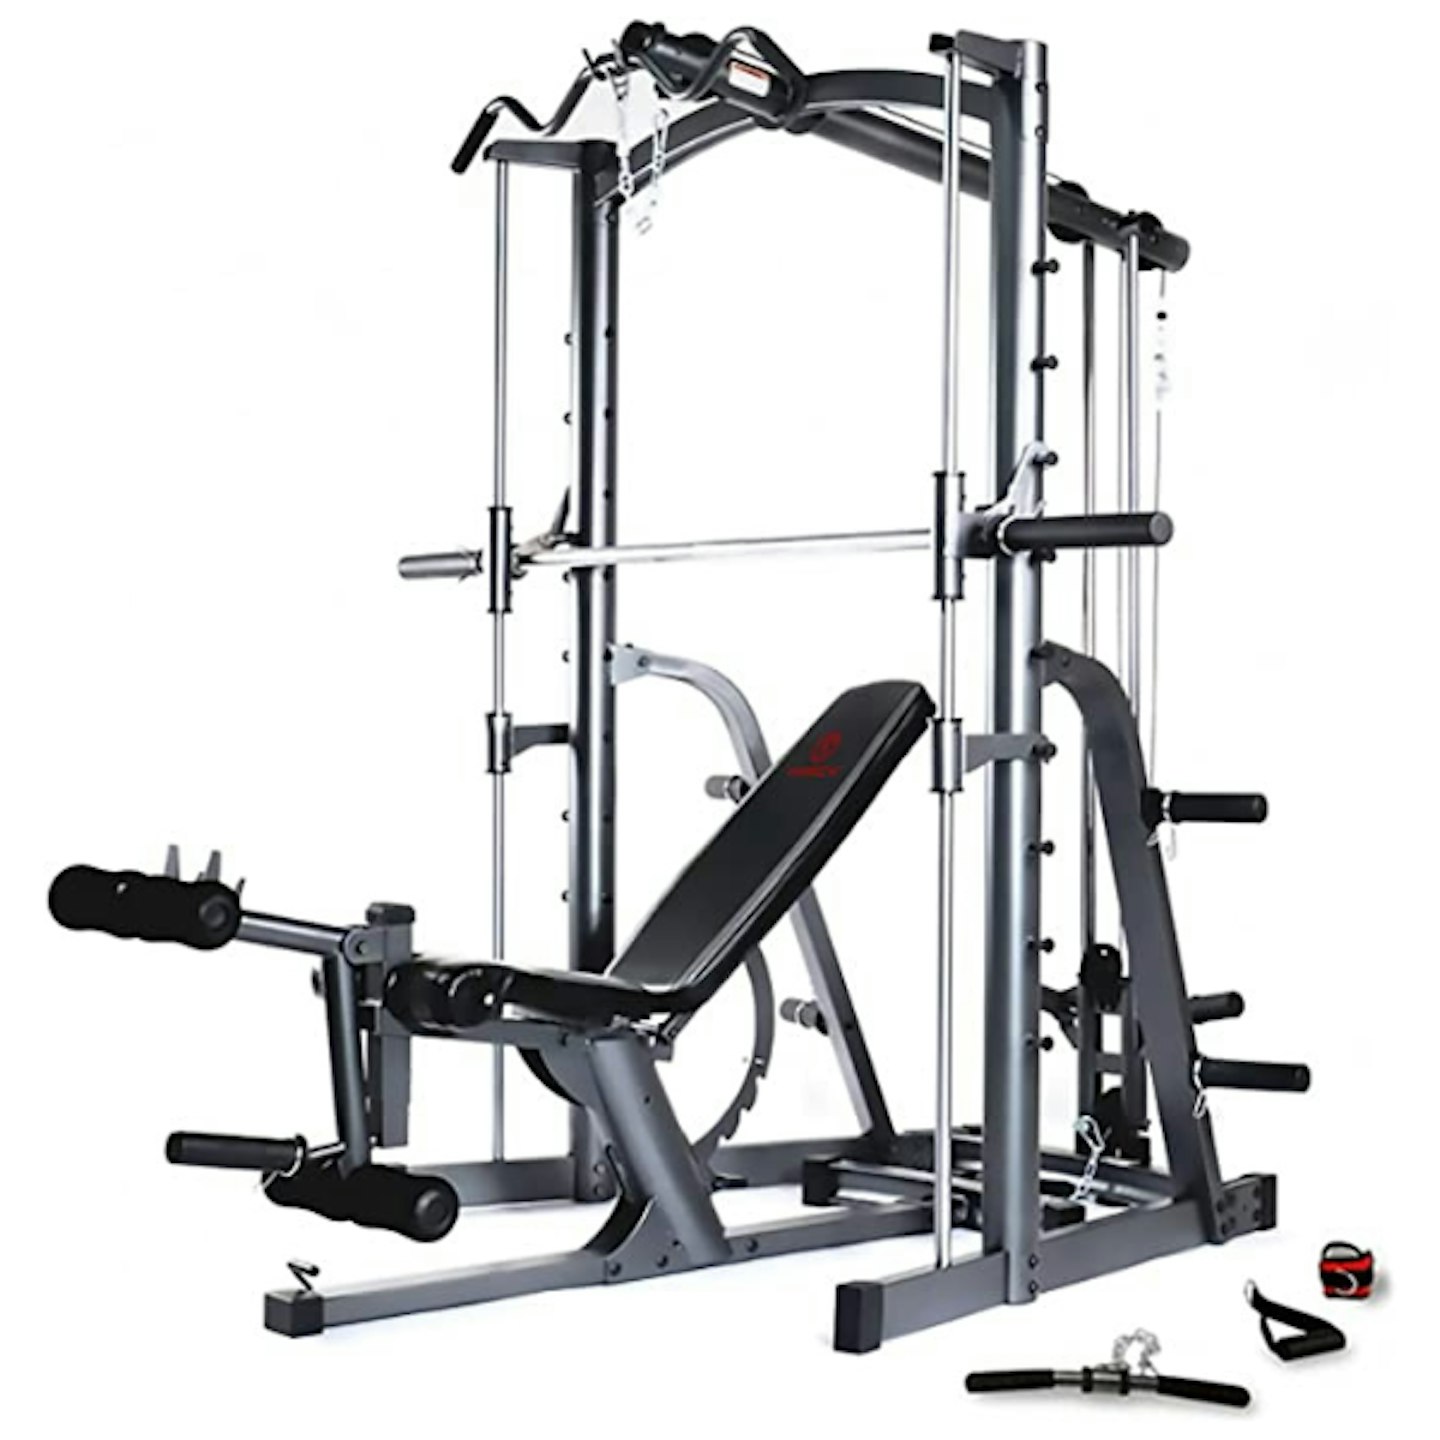 Marcy MWB1282 Platinum Smith Machine Home Gym with Weight Bench